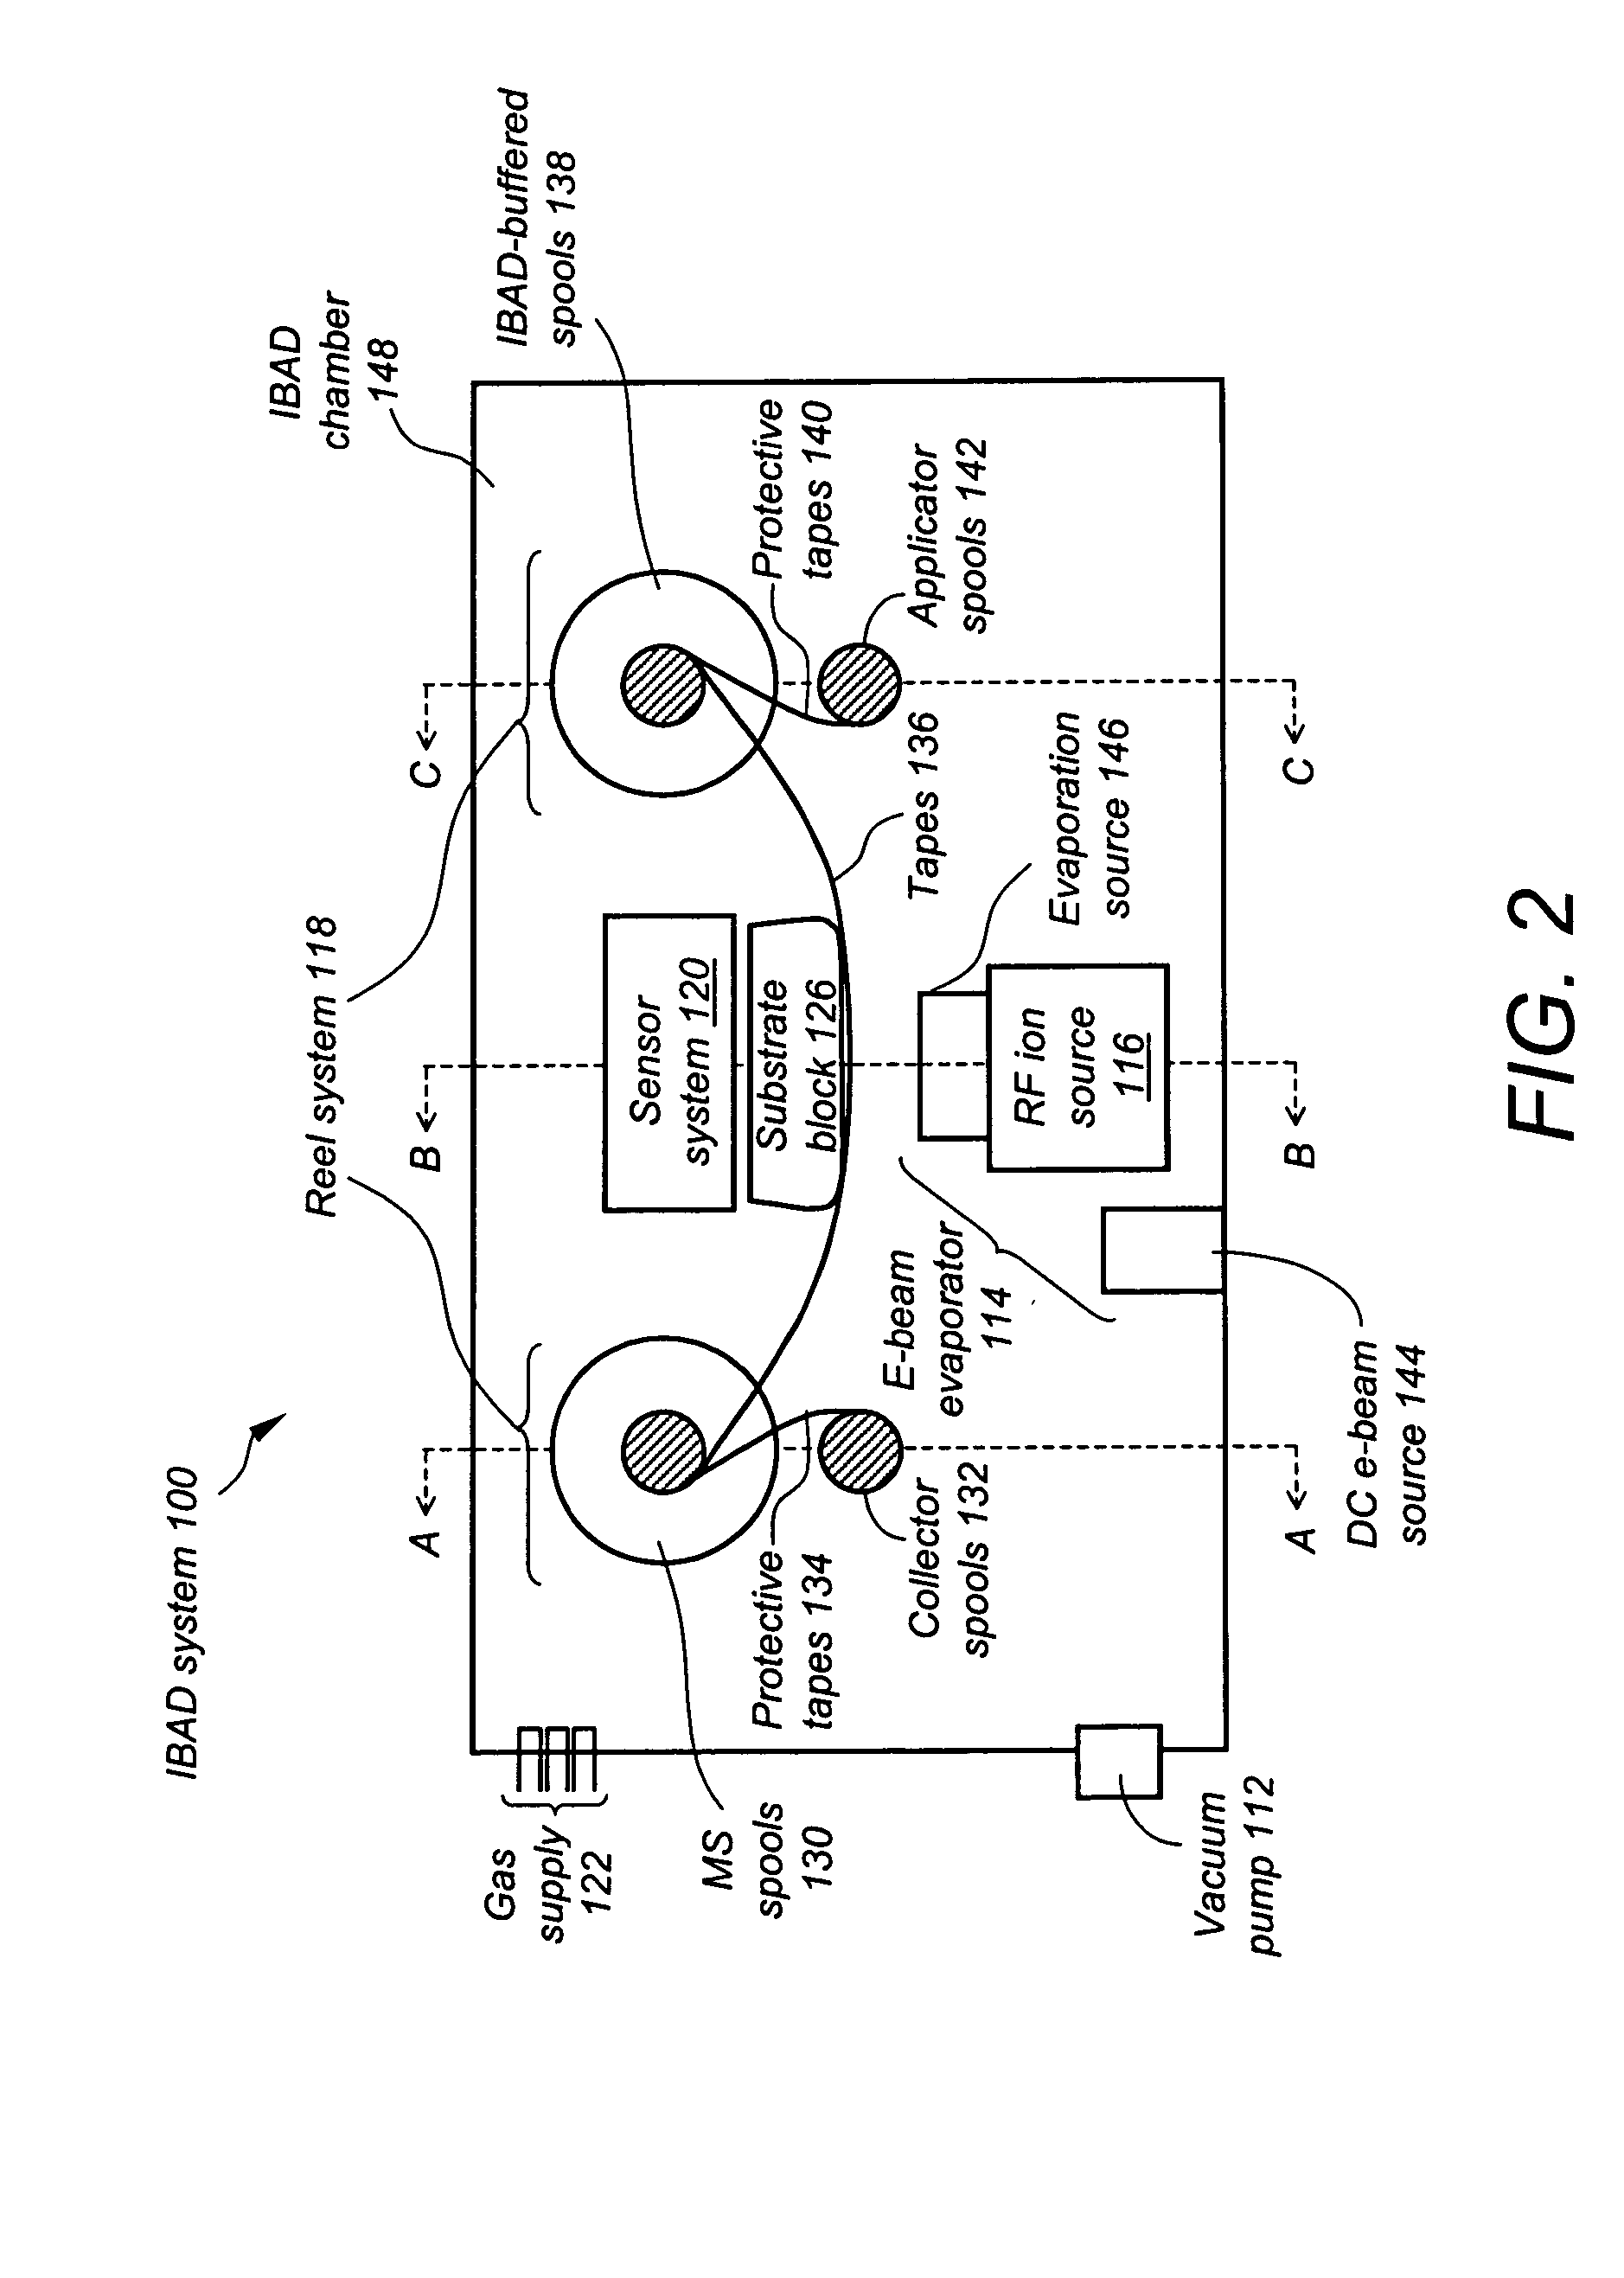 Apparatus for high-throughput ion beam-assisted deposition (IBAD)